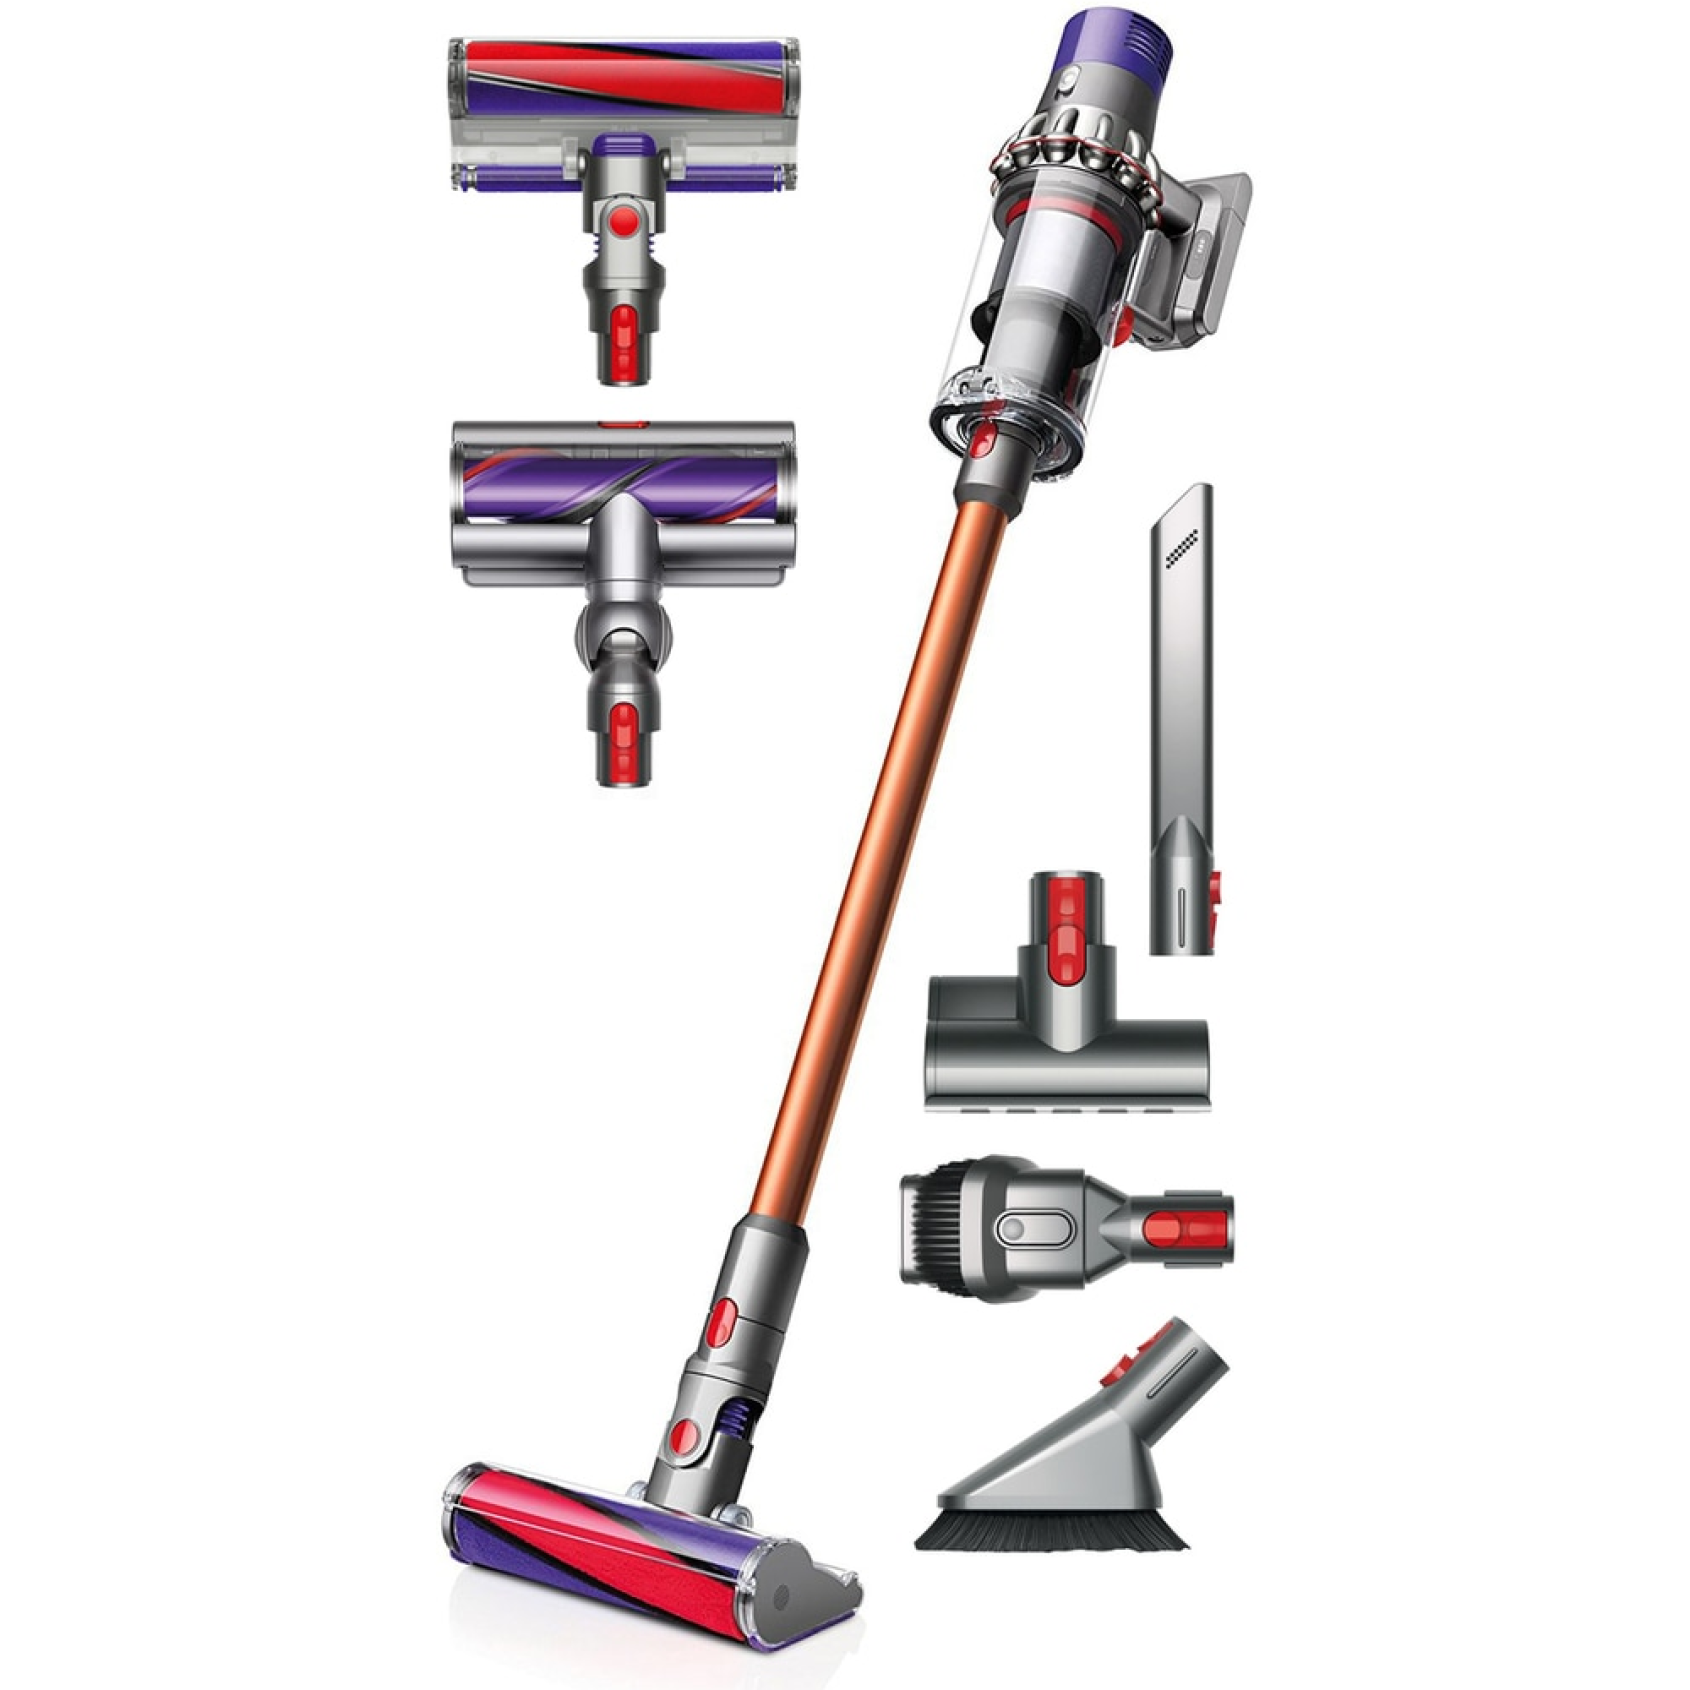 Absolute 10. Dyson Cyclone v10 absolute. Пылесос Dyson v10 absolute. Пылесос Dyson Cyclone v10. Пылесос Dyson Cyclone v10 absolute.